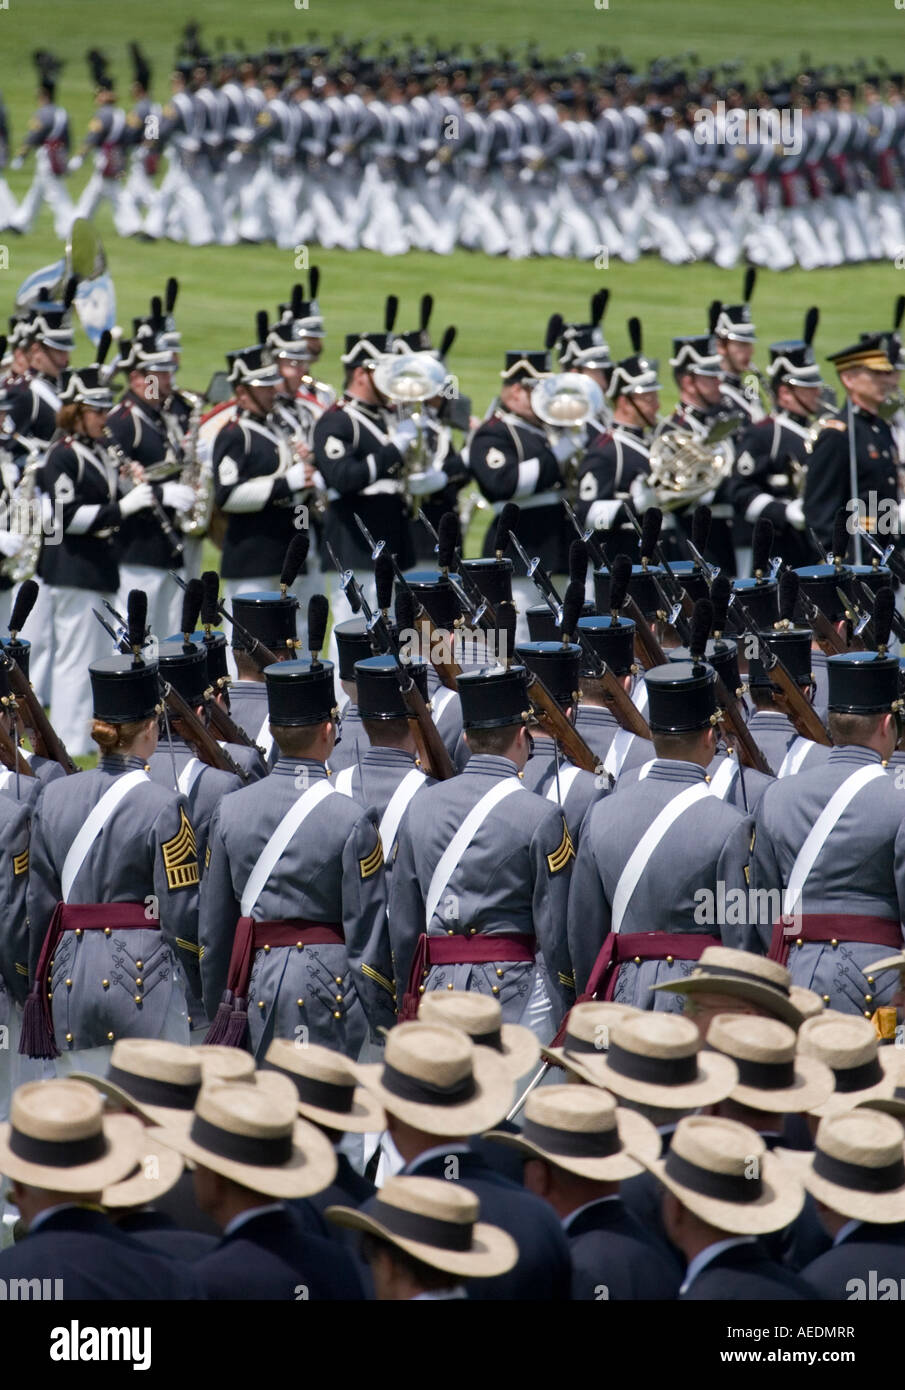 Cadets march annual Alumni Review United States Military Academy at West Point Hudson Valley New York Stock Photo